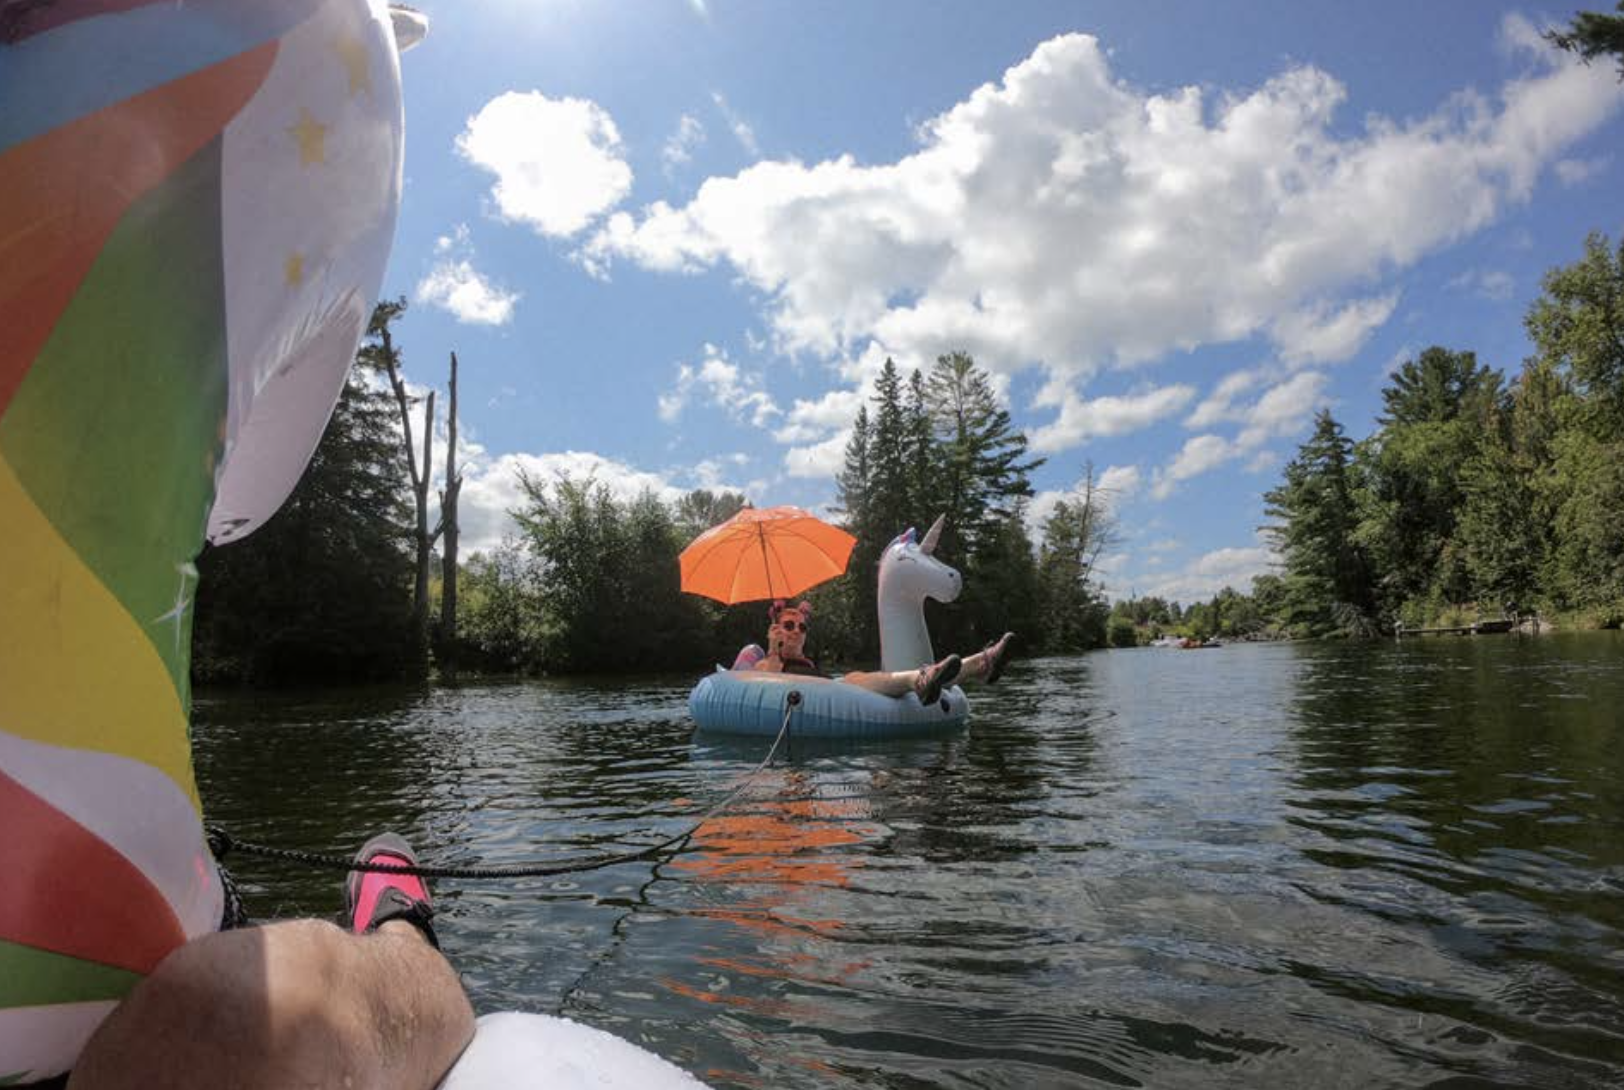 a person wearing sunglasses floating down a river in a large inflatable unicorn floaty, shaded by an orange umbrella. The leg of the photographer can be seen, as well as the head of another inflatable unicorn that they sit in.